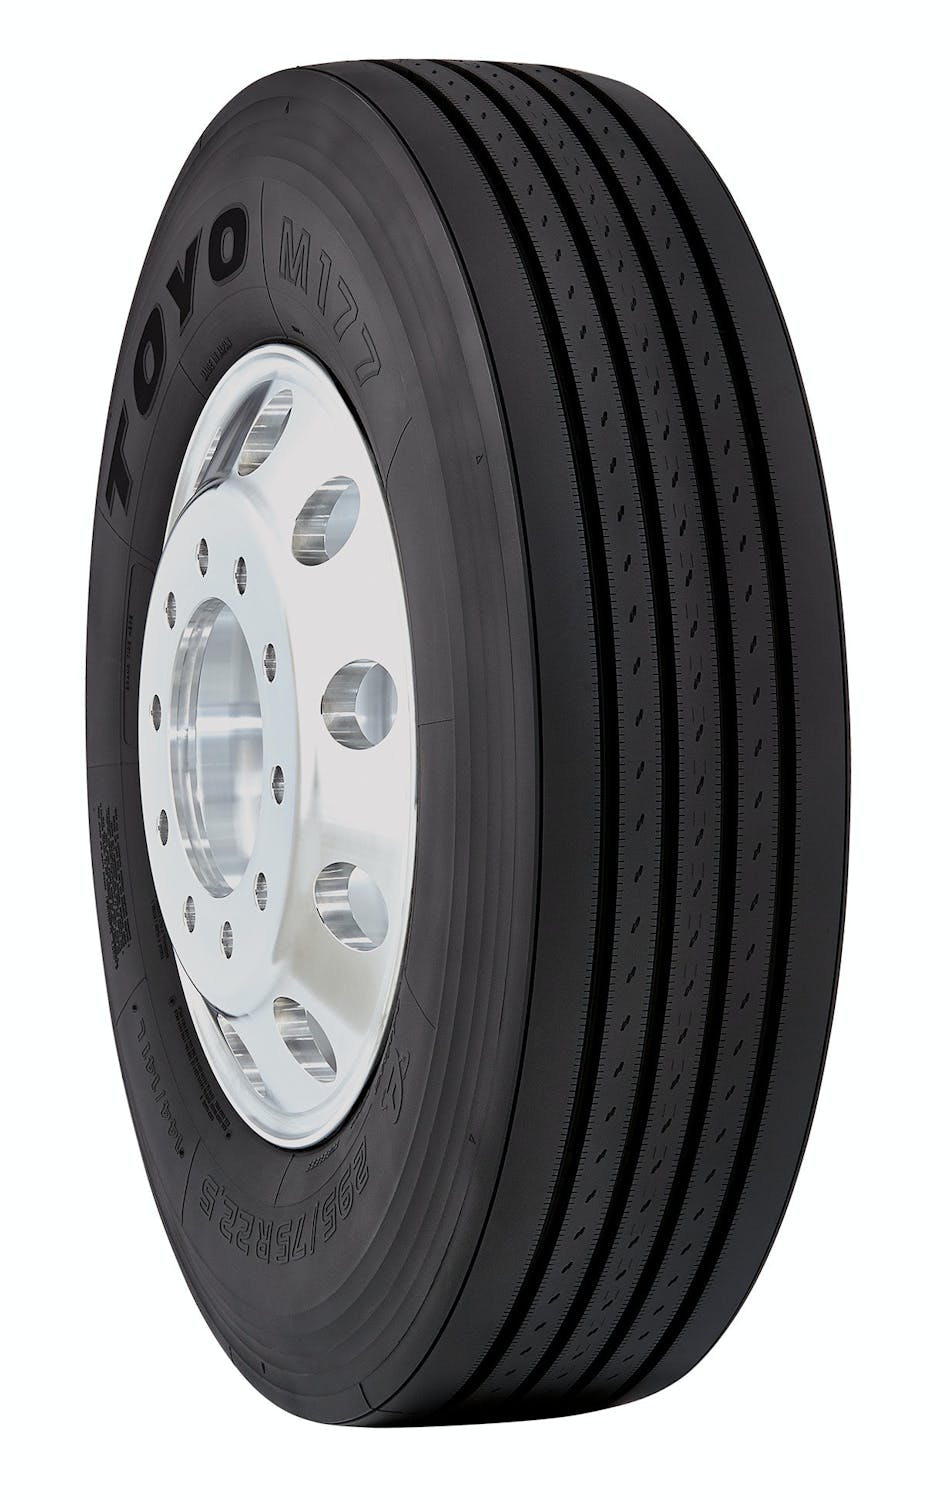 toyo-to-unveil-three-new-tires-at-mats